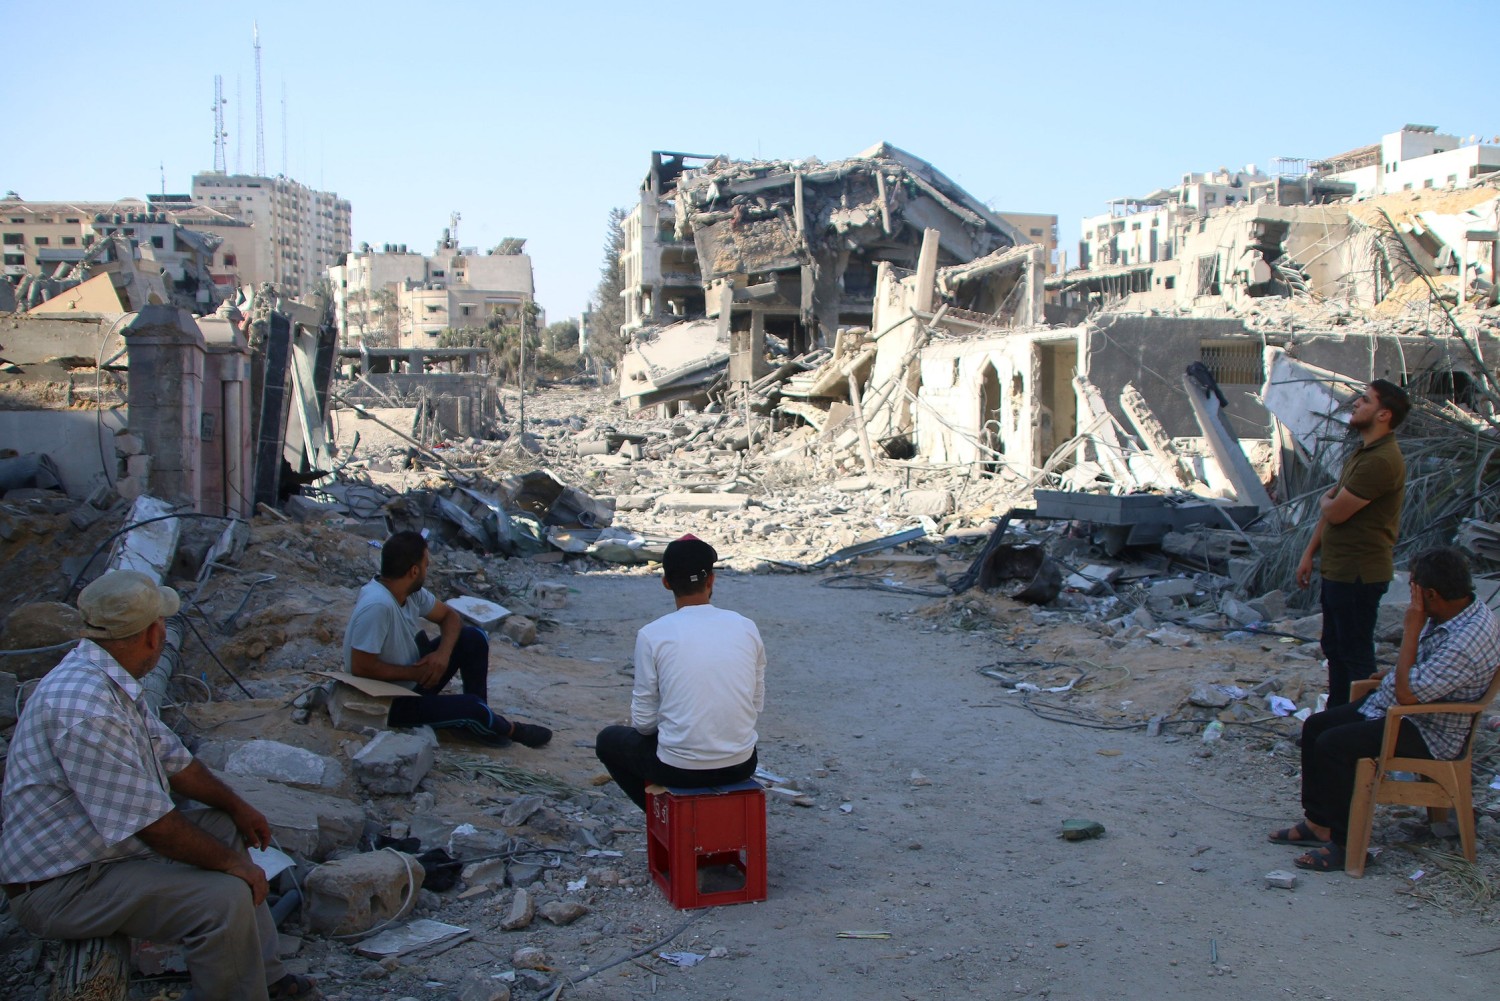 Gaza City, six days after Hamas launched its offensive.Photograph by Ahmad Hasaballah / Getty